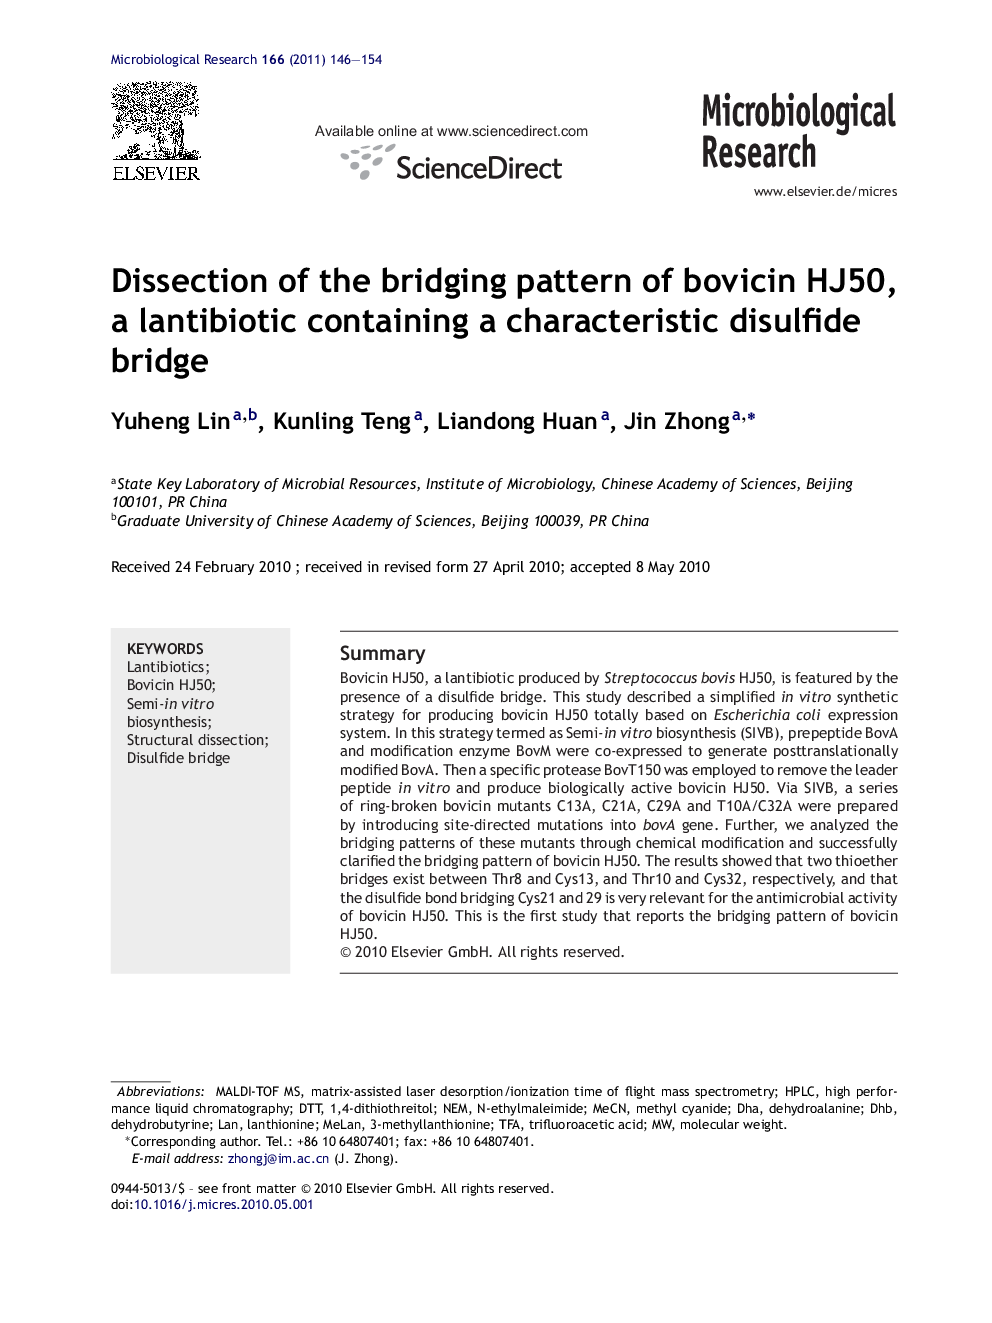 Dissection of the bridging pattern of bovicin HJ50, a lantibiotic containing a characteristic disulfide bridge